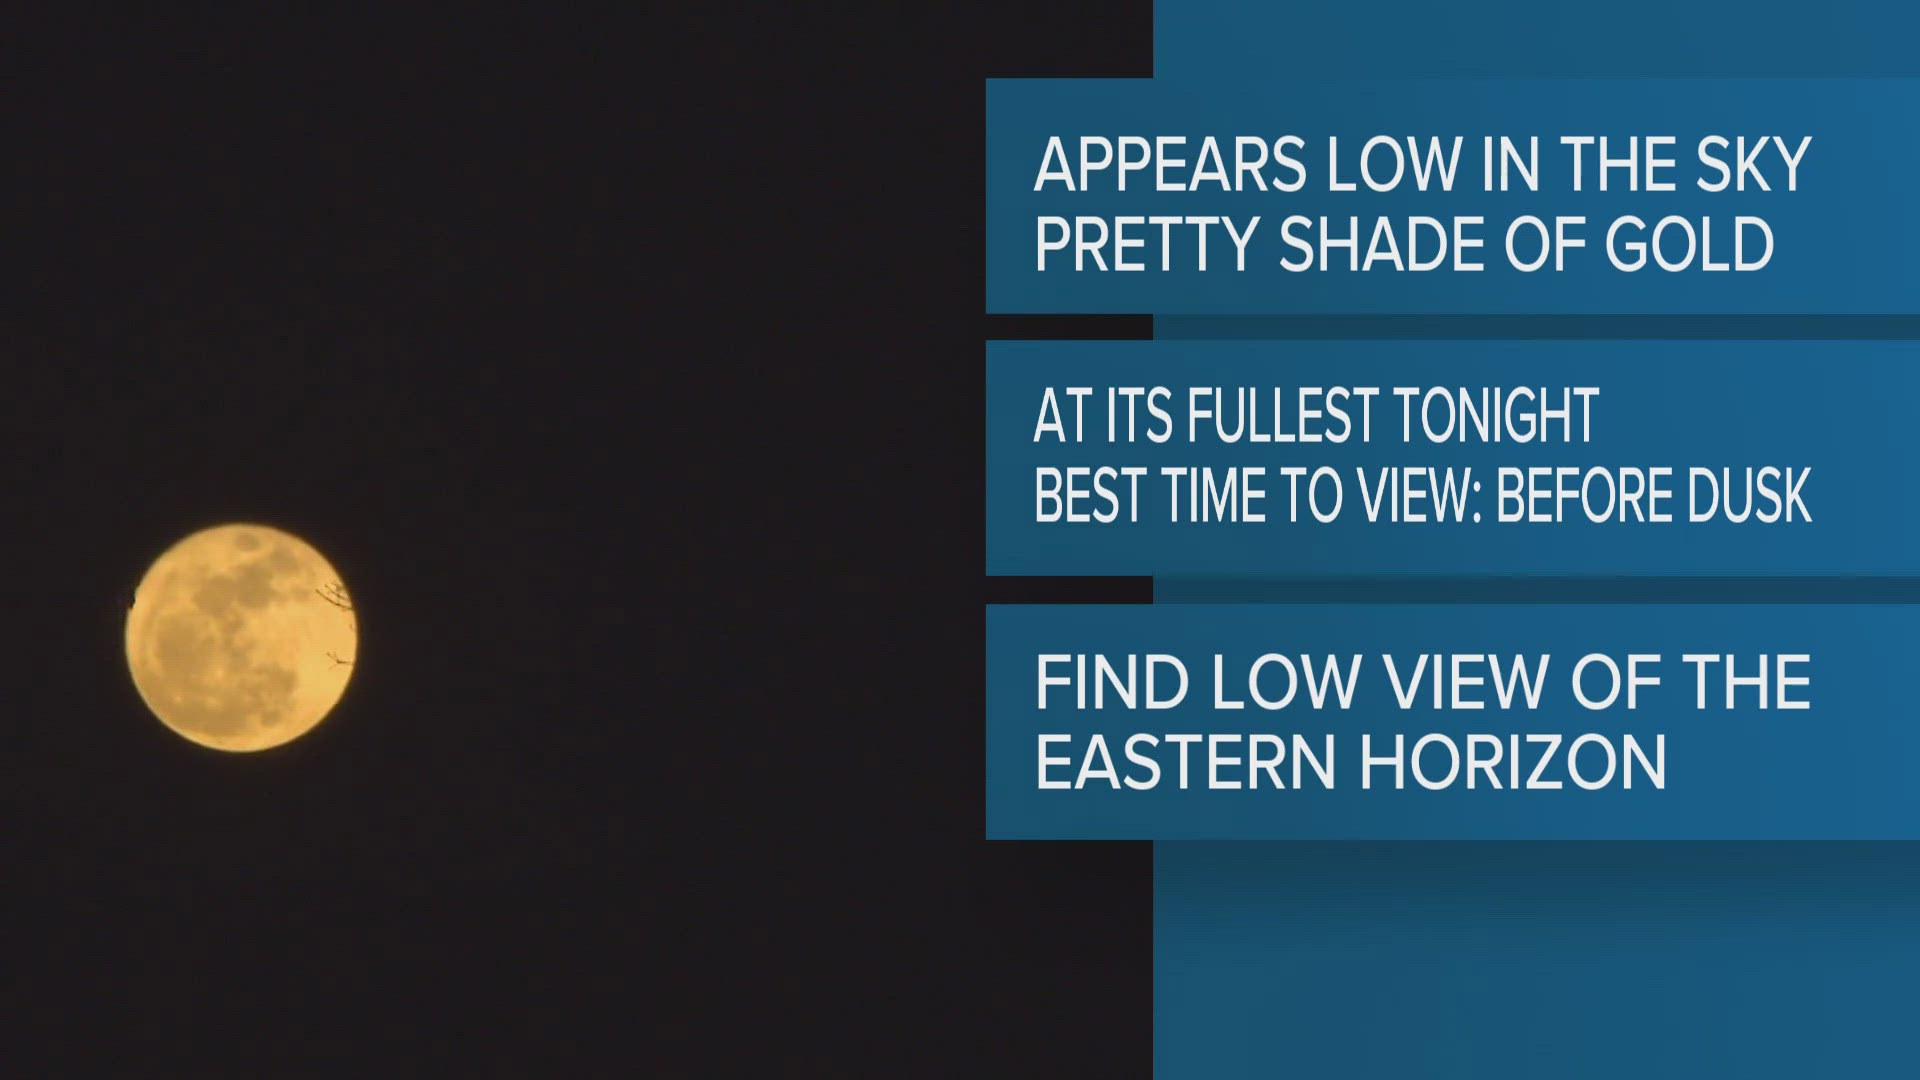 The Strawberry Moon will be in full view Friday evening. Here is how you can watch this event.